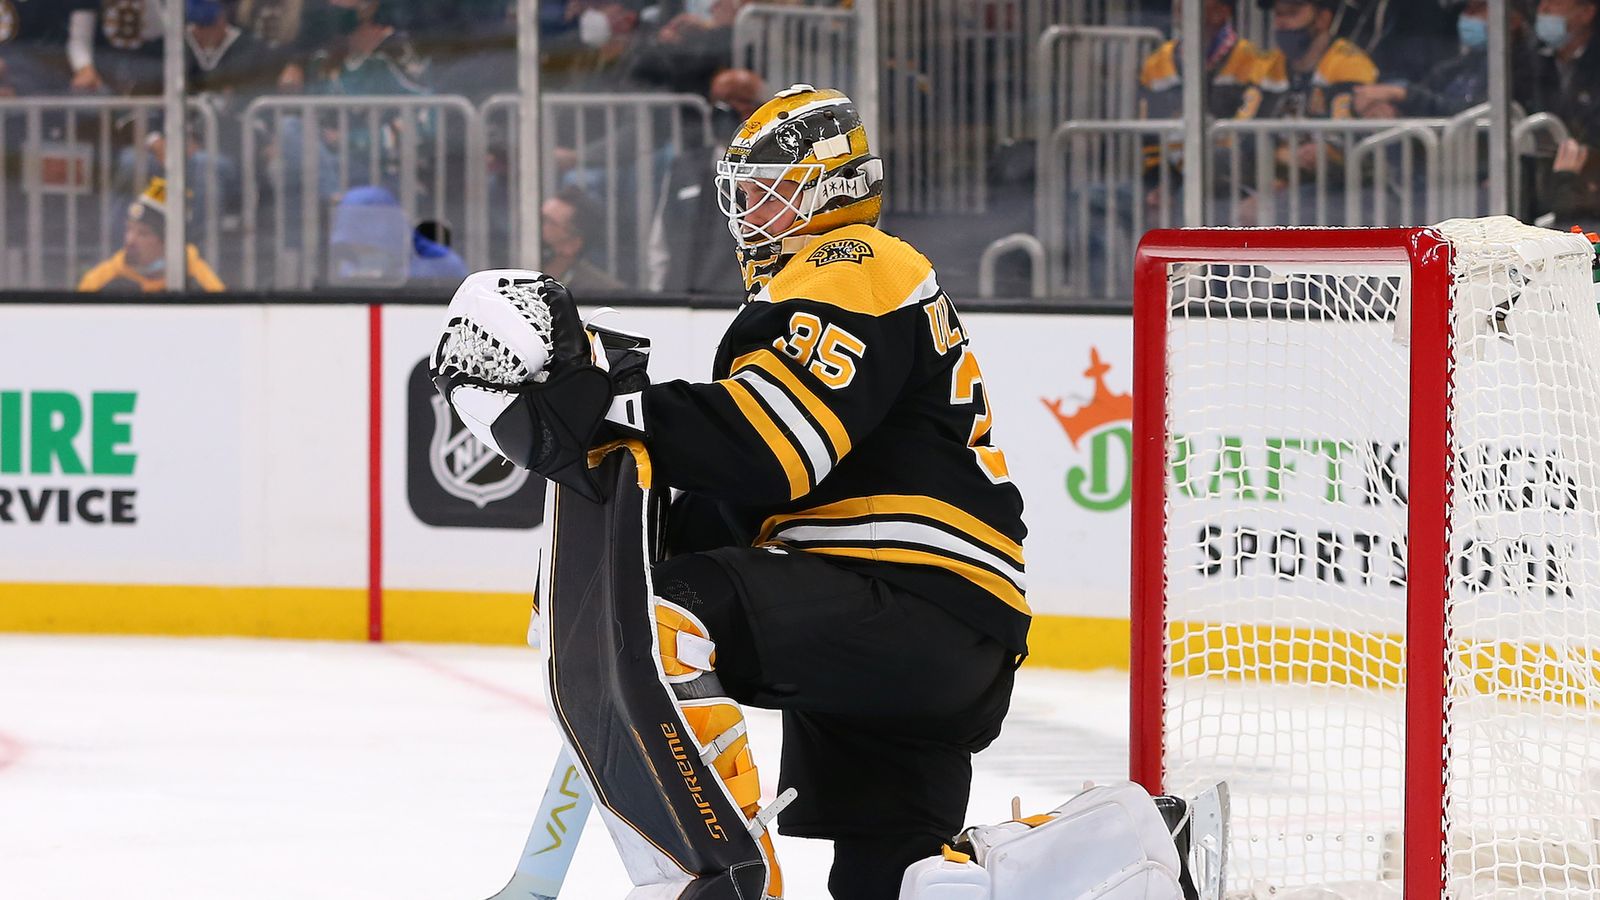 Live Coverage Bruins vs. Panthers, 7 p.m. Studnicka bumped up to 2C